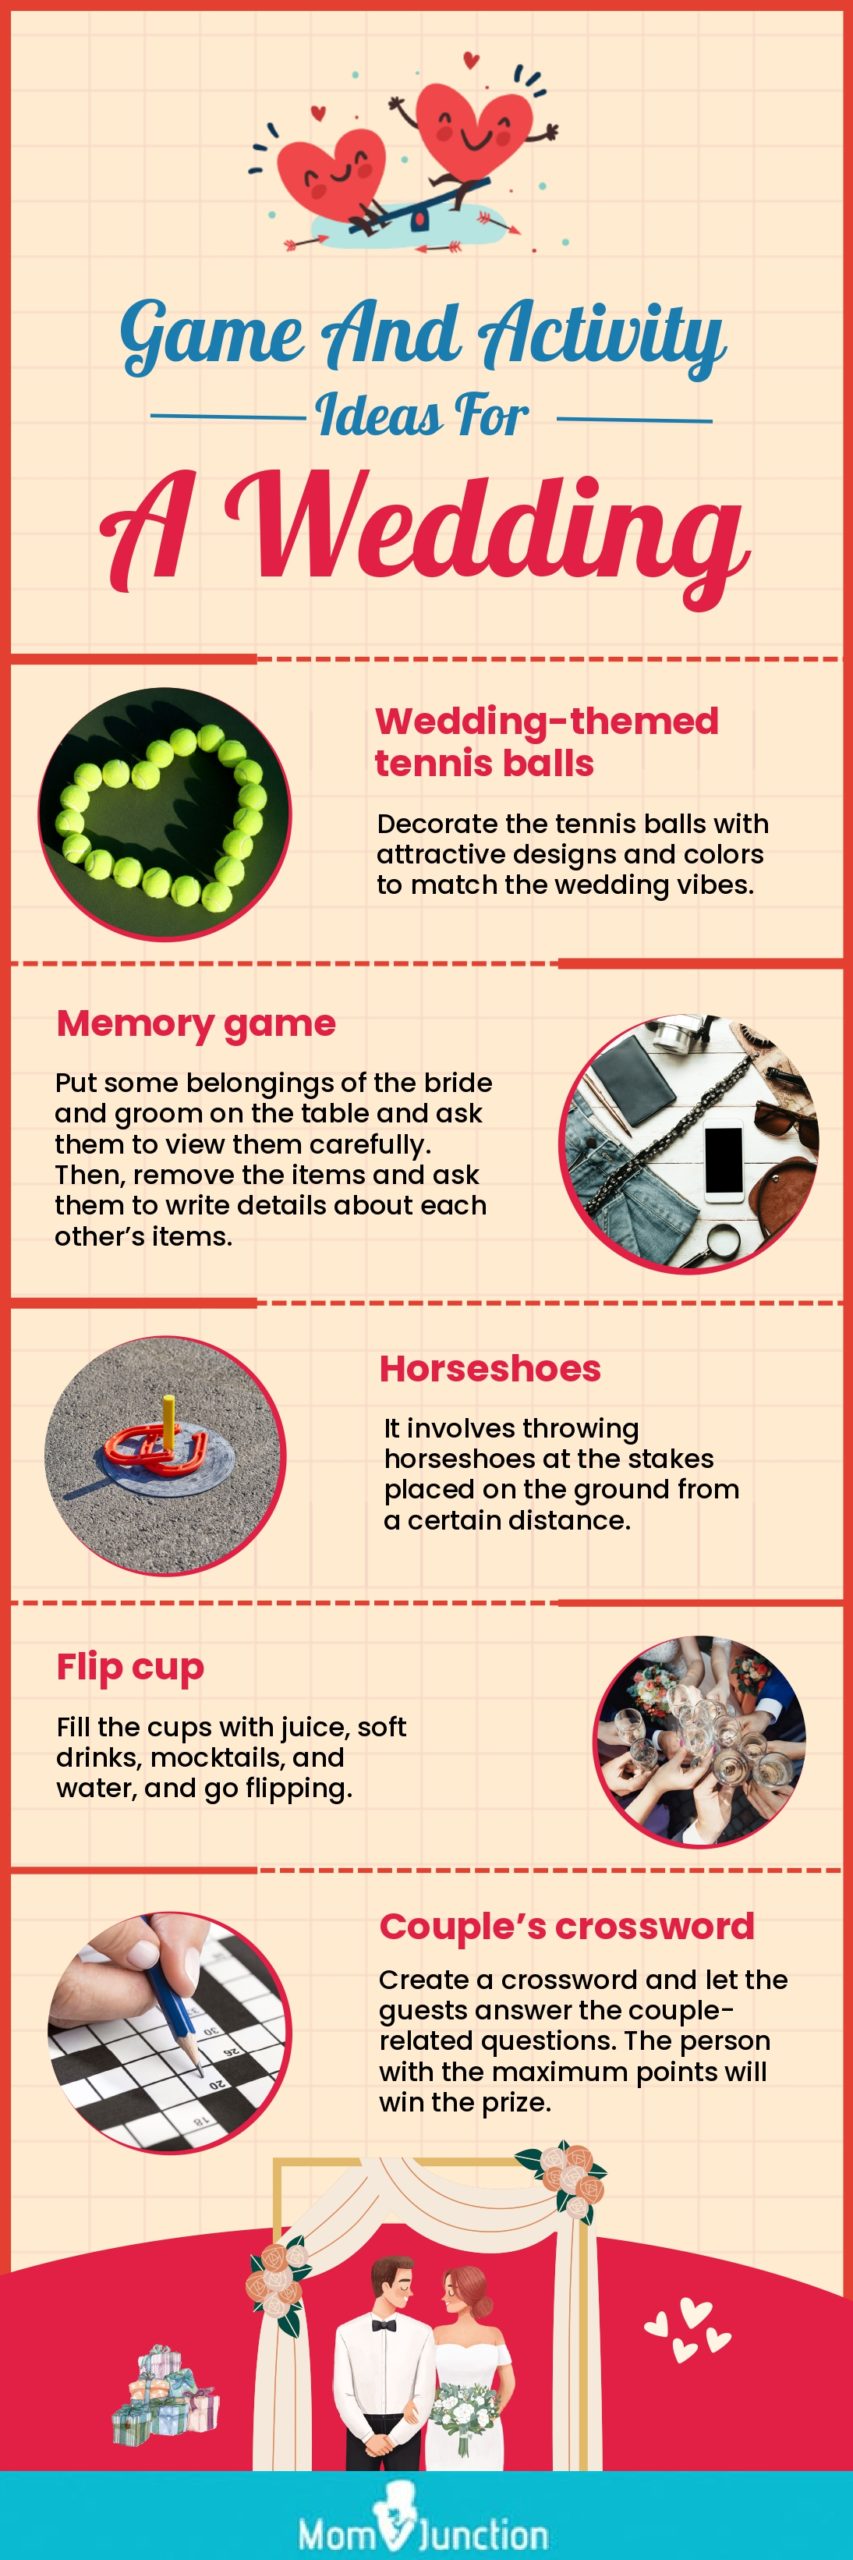 game and activity ideas for a wedding (infographic)